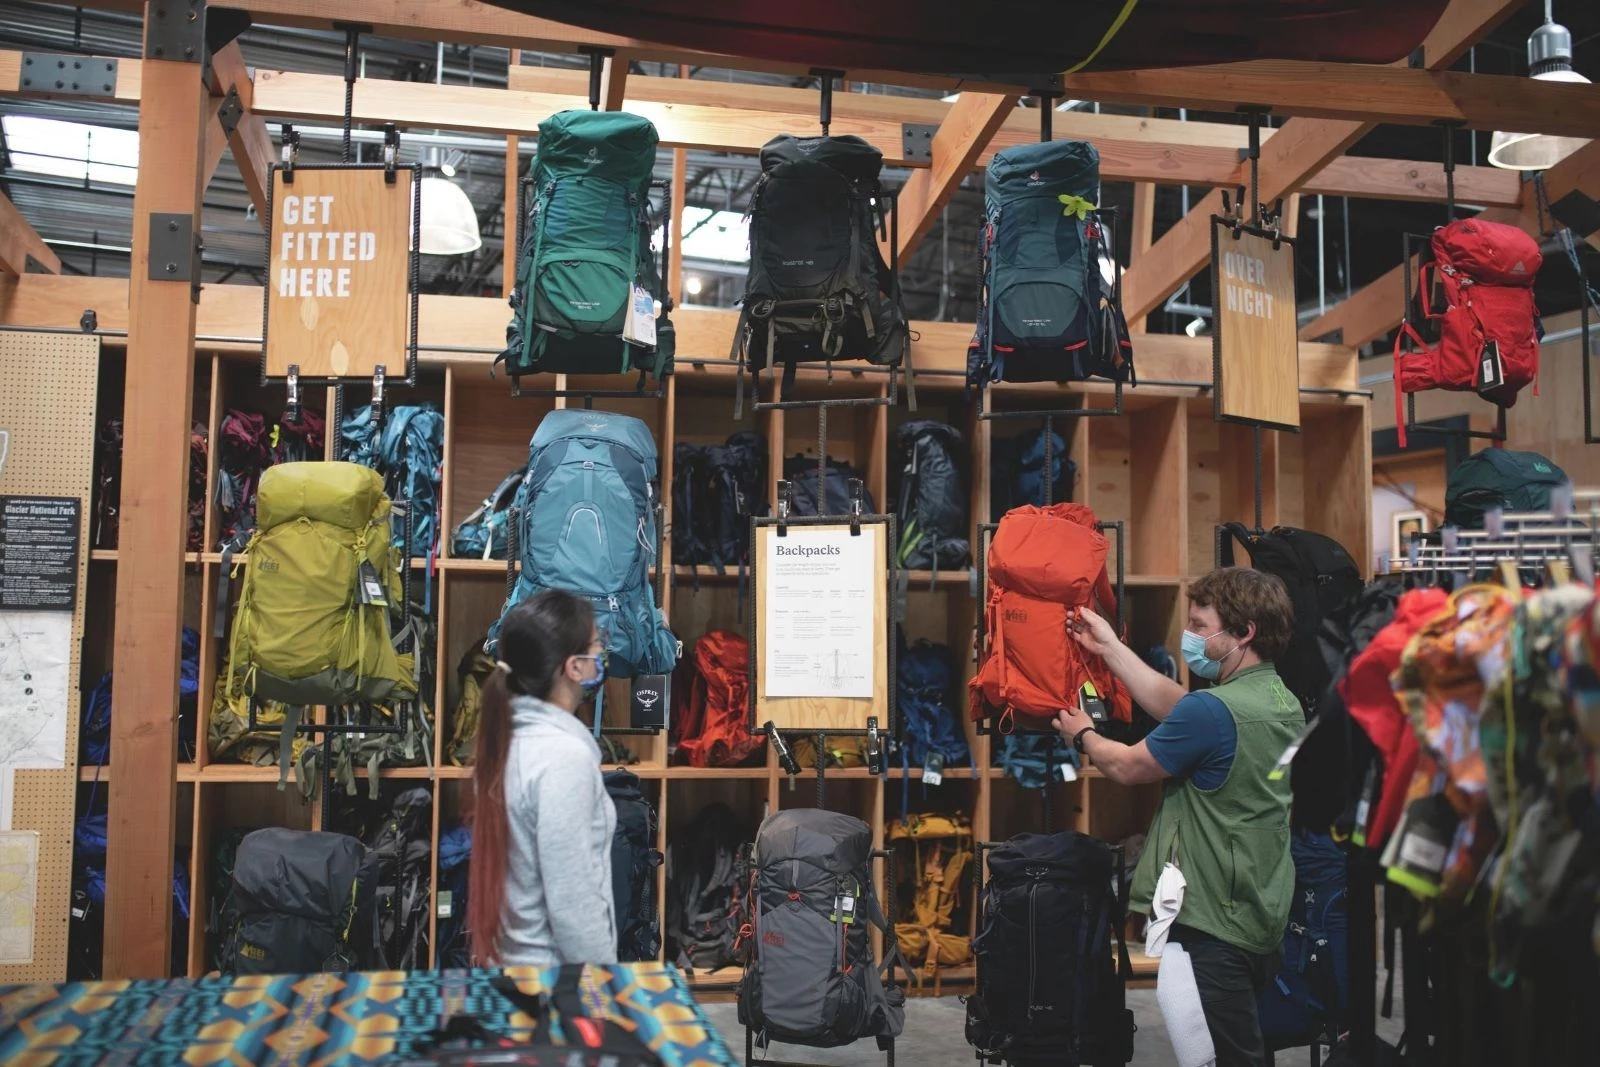 REI Princeton Store - Lawrenceville, NJ - Sporting Goods, Camping Gear